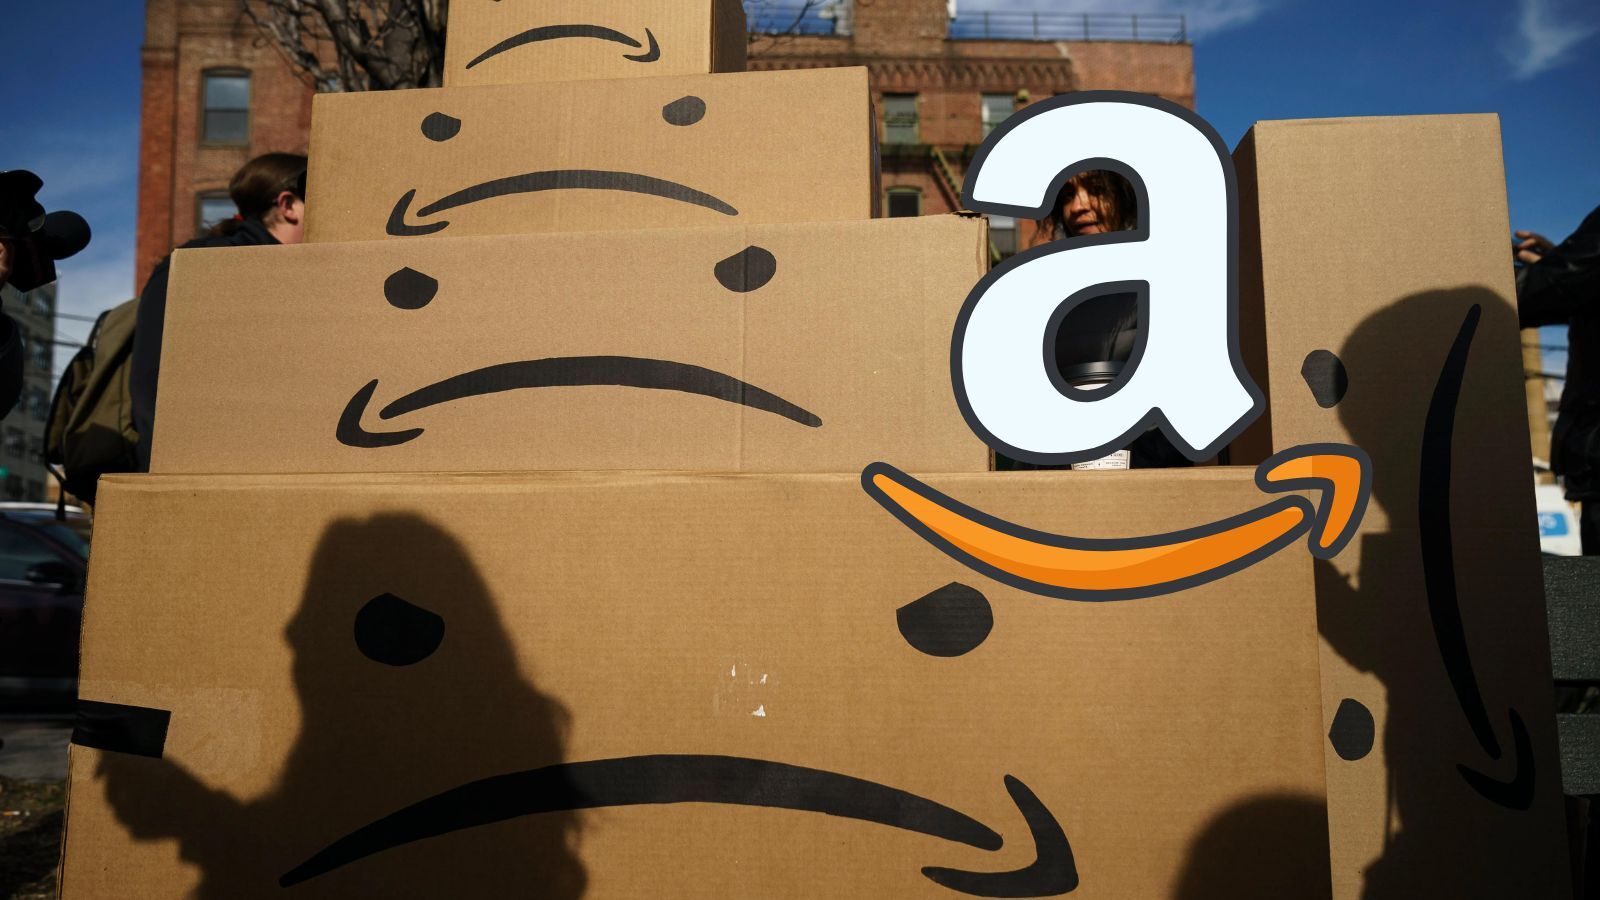 Is Amazon Evil? (Exploring the Good and the Bad)